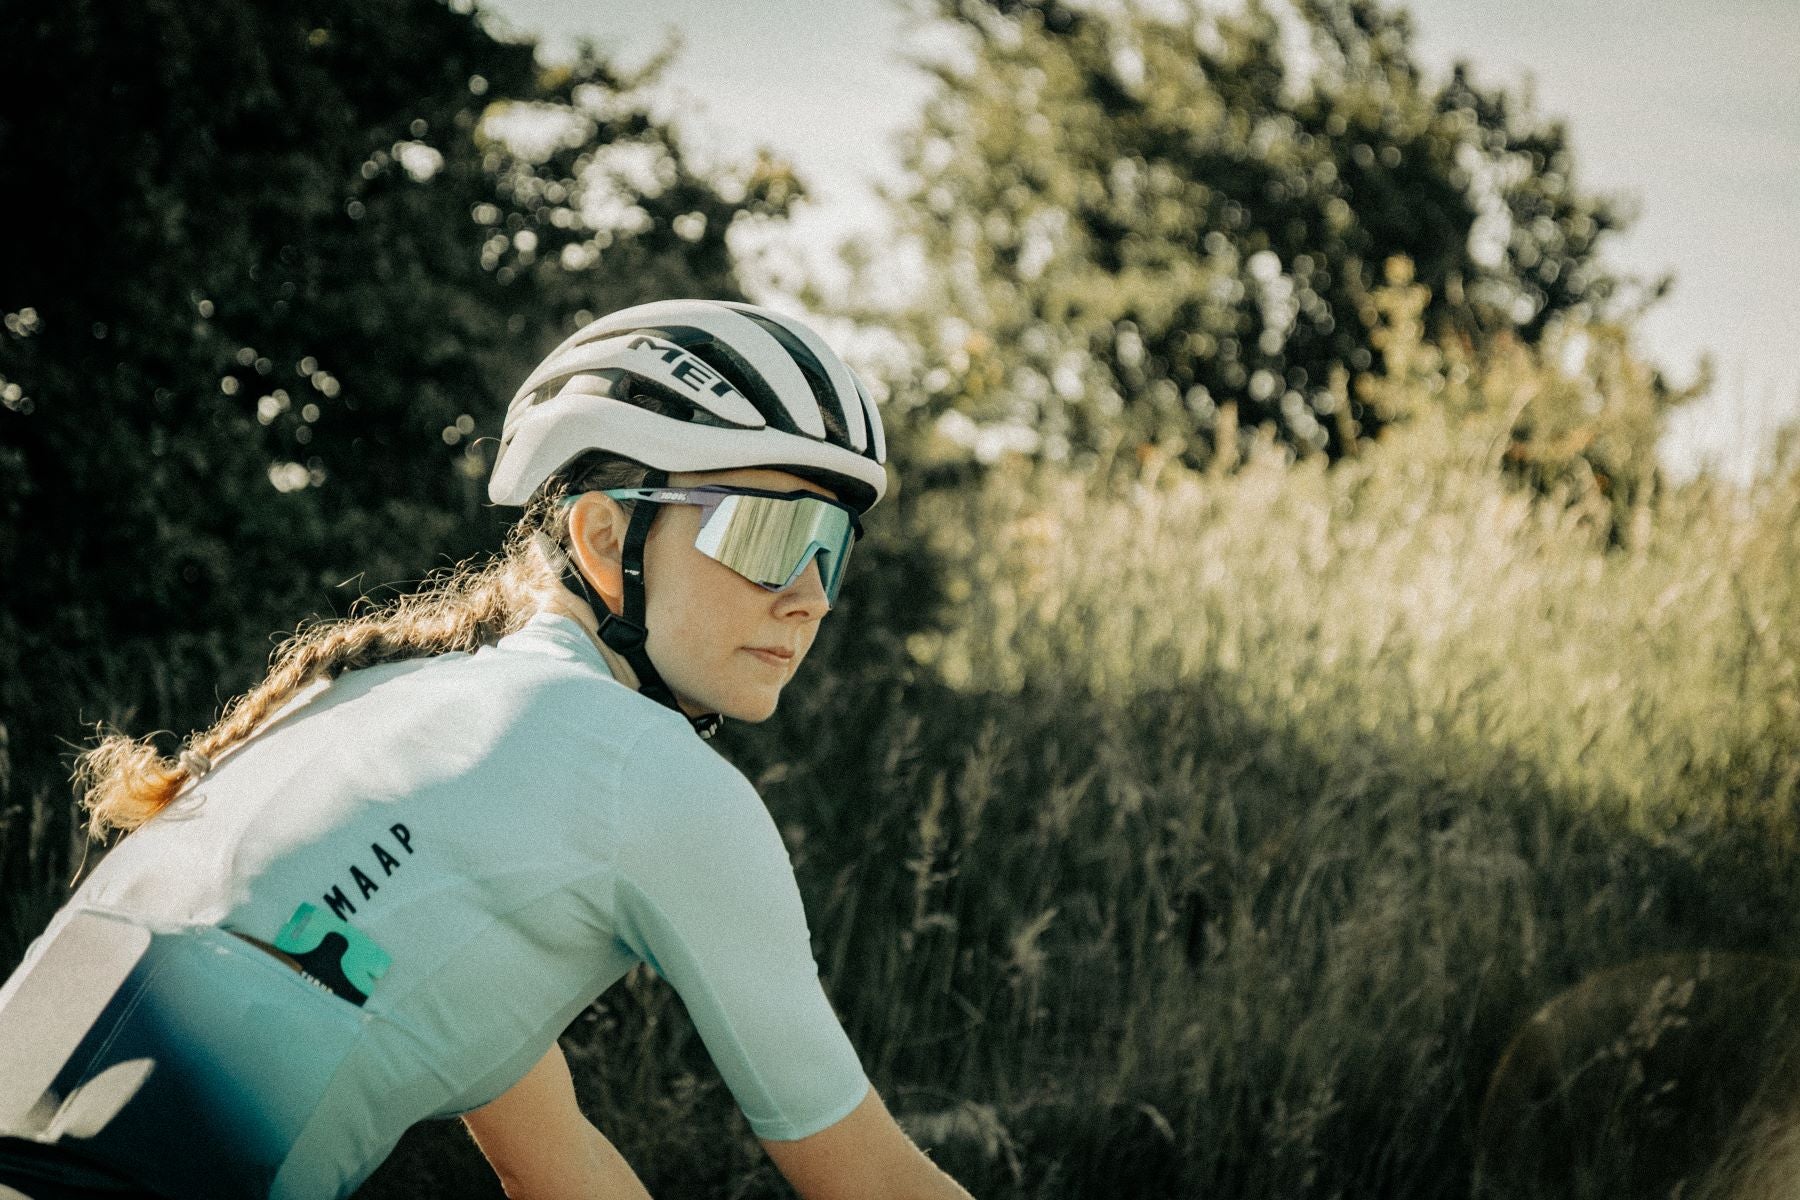 female athlete wearing helmet on a bike cycling through country lanes